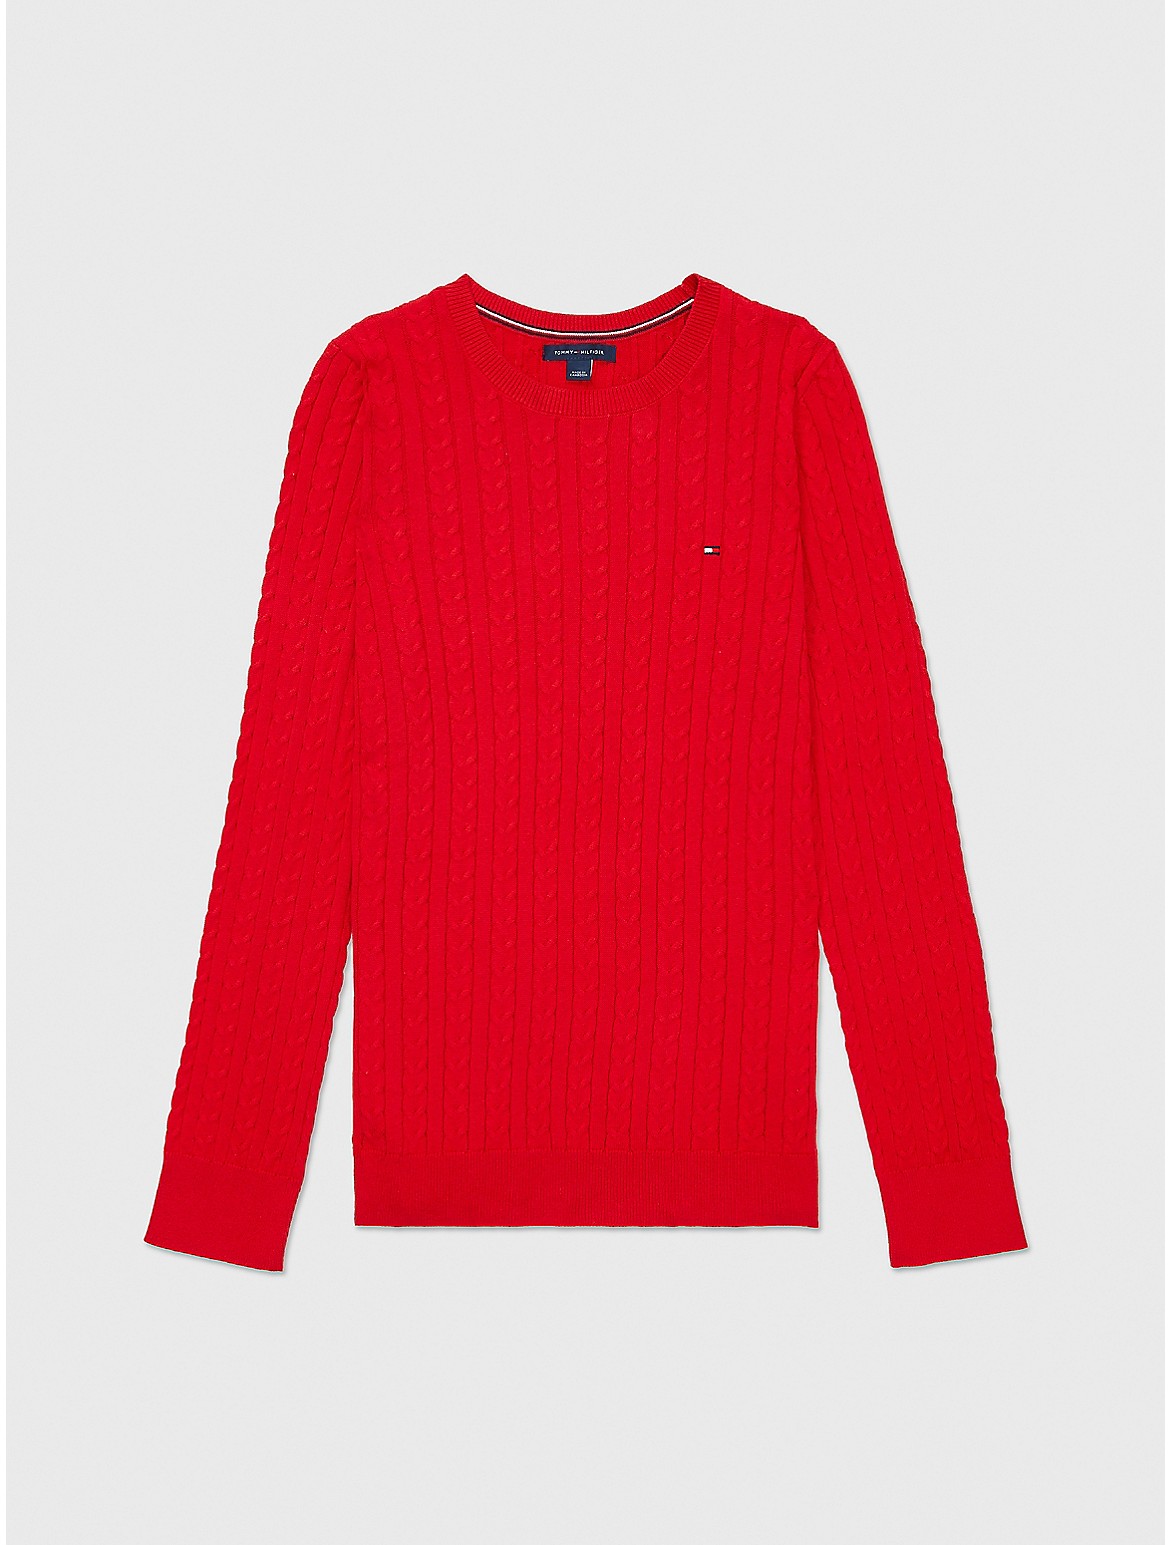 Tommy Hilfiger Women's Cotton Cable Knit Sweater